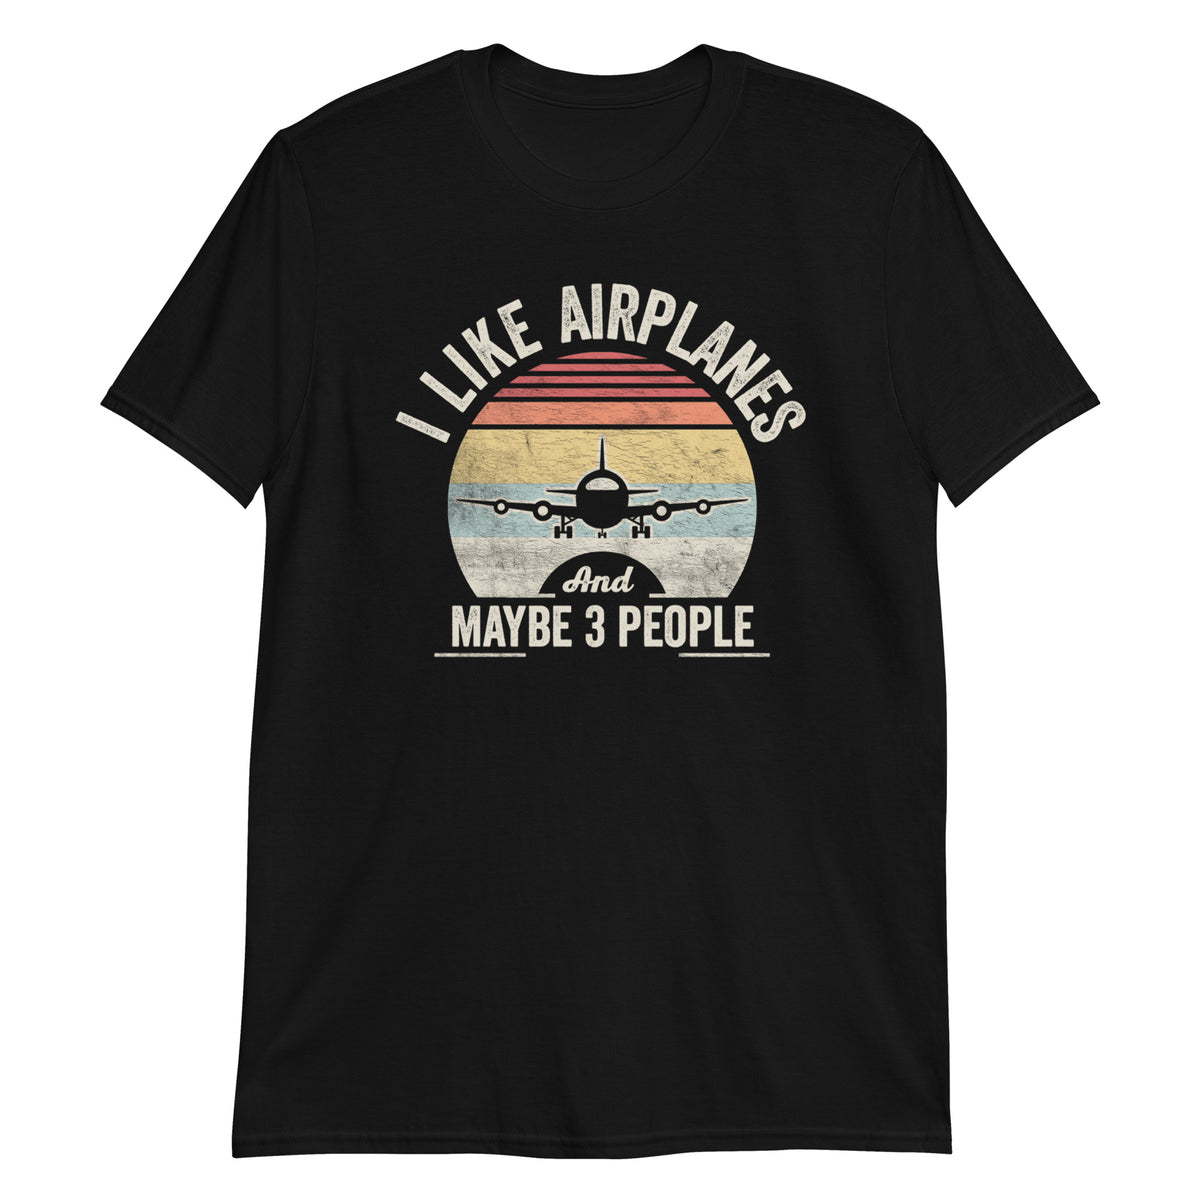 I Like Airplanes and Maybe 3 People T-Shirt